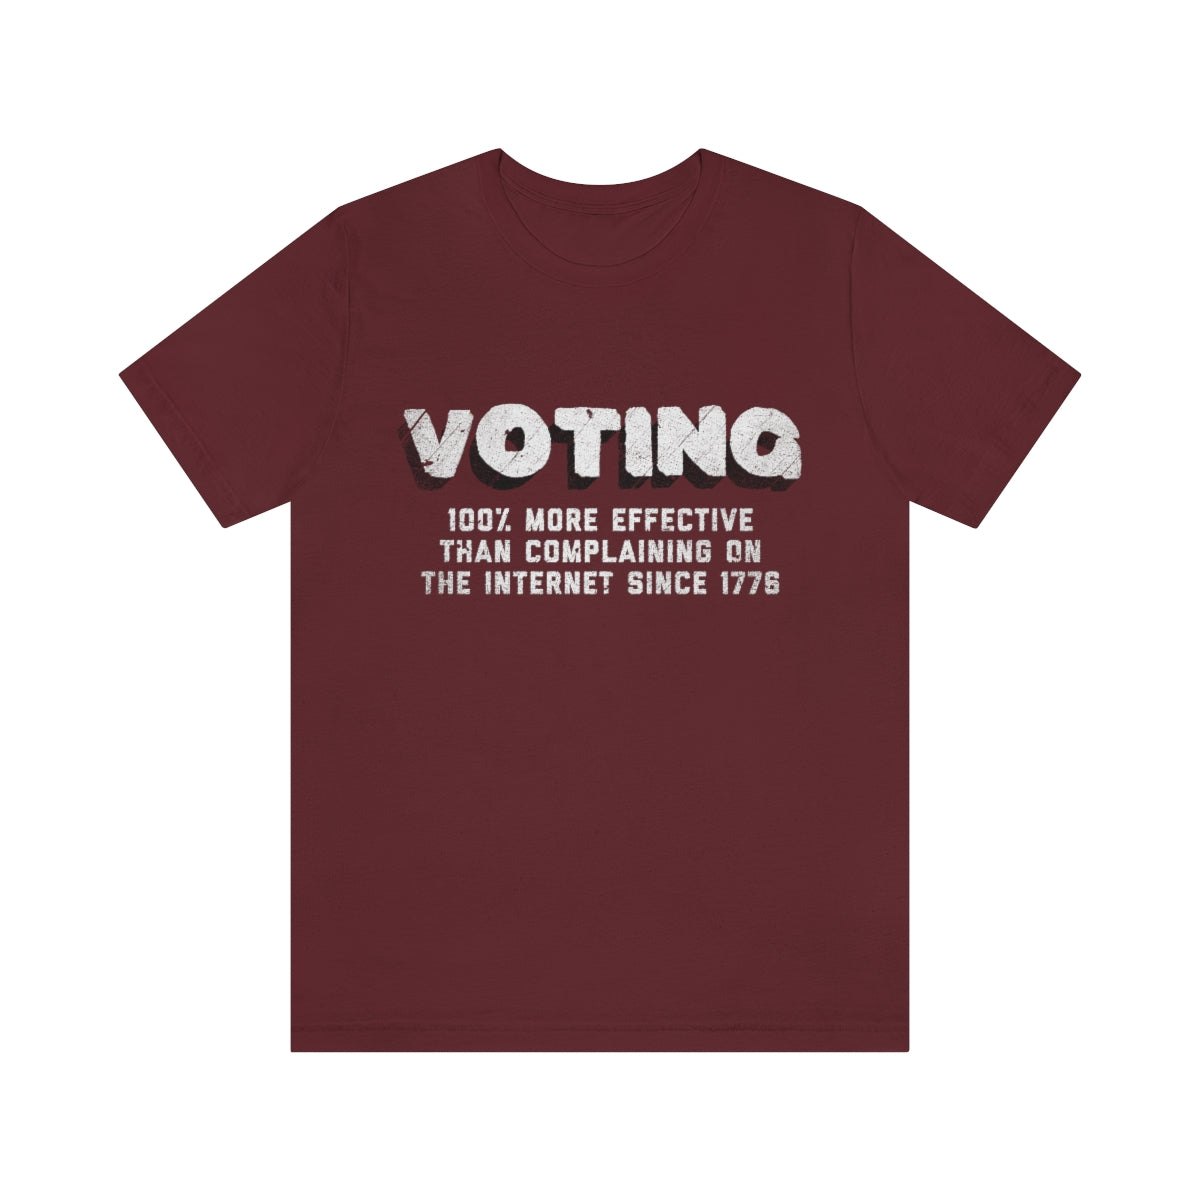 "Voting: 100% More Effective than Complaining on the Internet Since 1976" Unisex Jersey Short Sleeve Tee